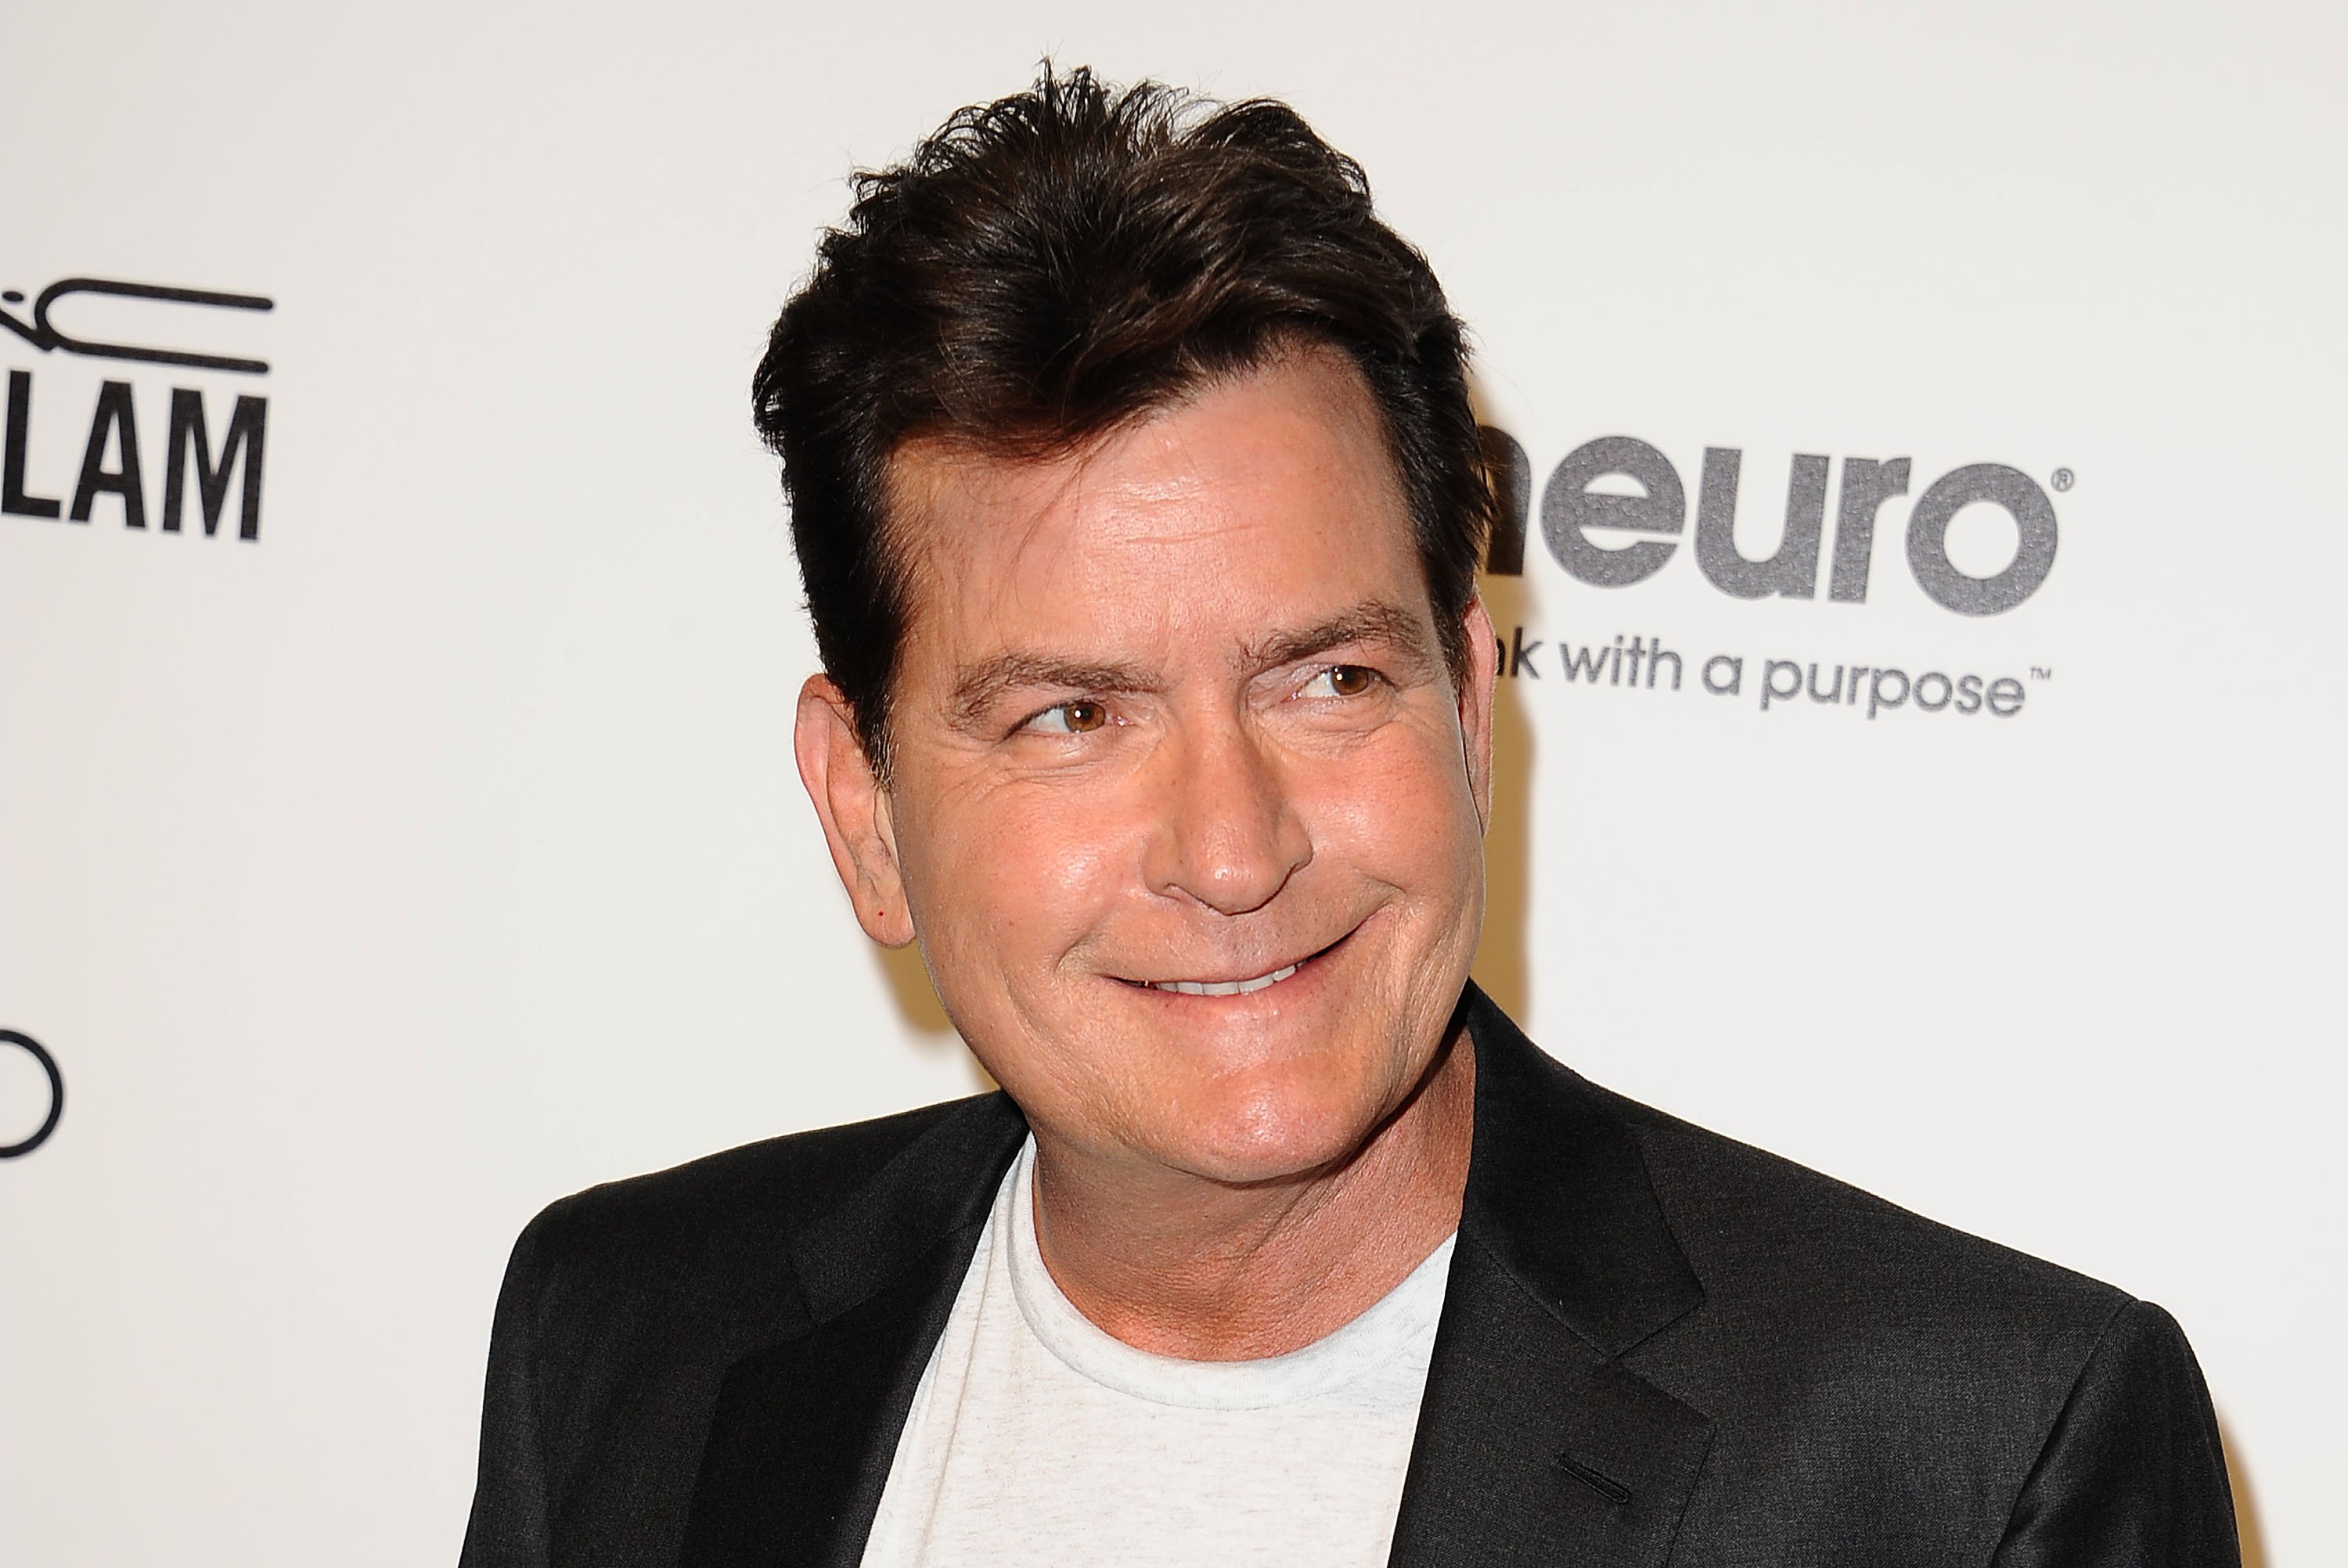 Charlie Sheen poses for a picture at the 24th annual Elton John AIDS Foundation's Oscar viewing party on February 28, 2016 | Source: Getty Images